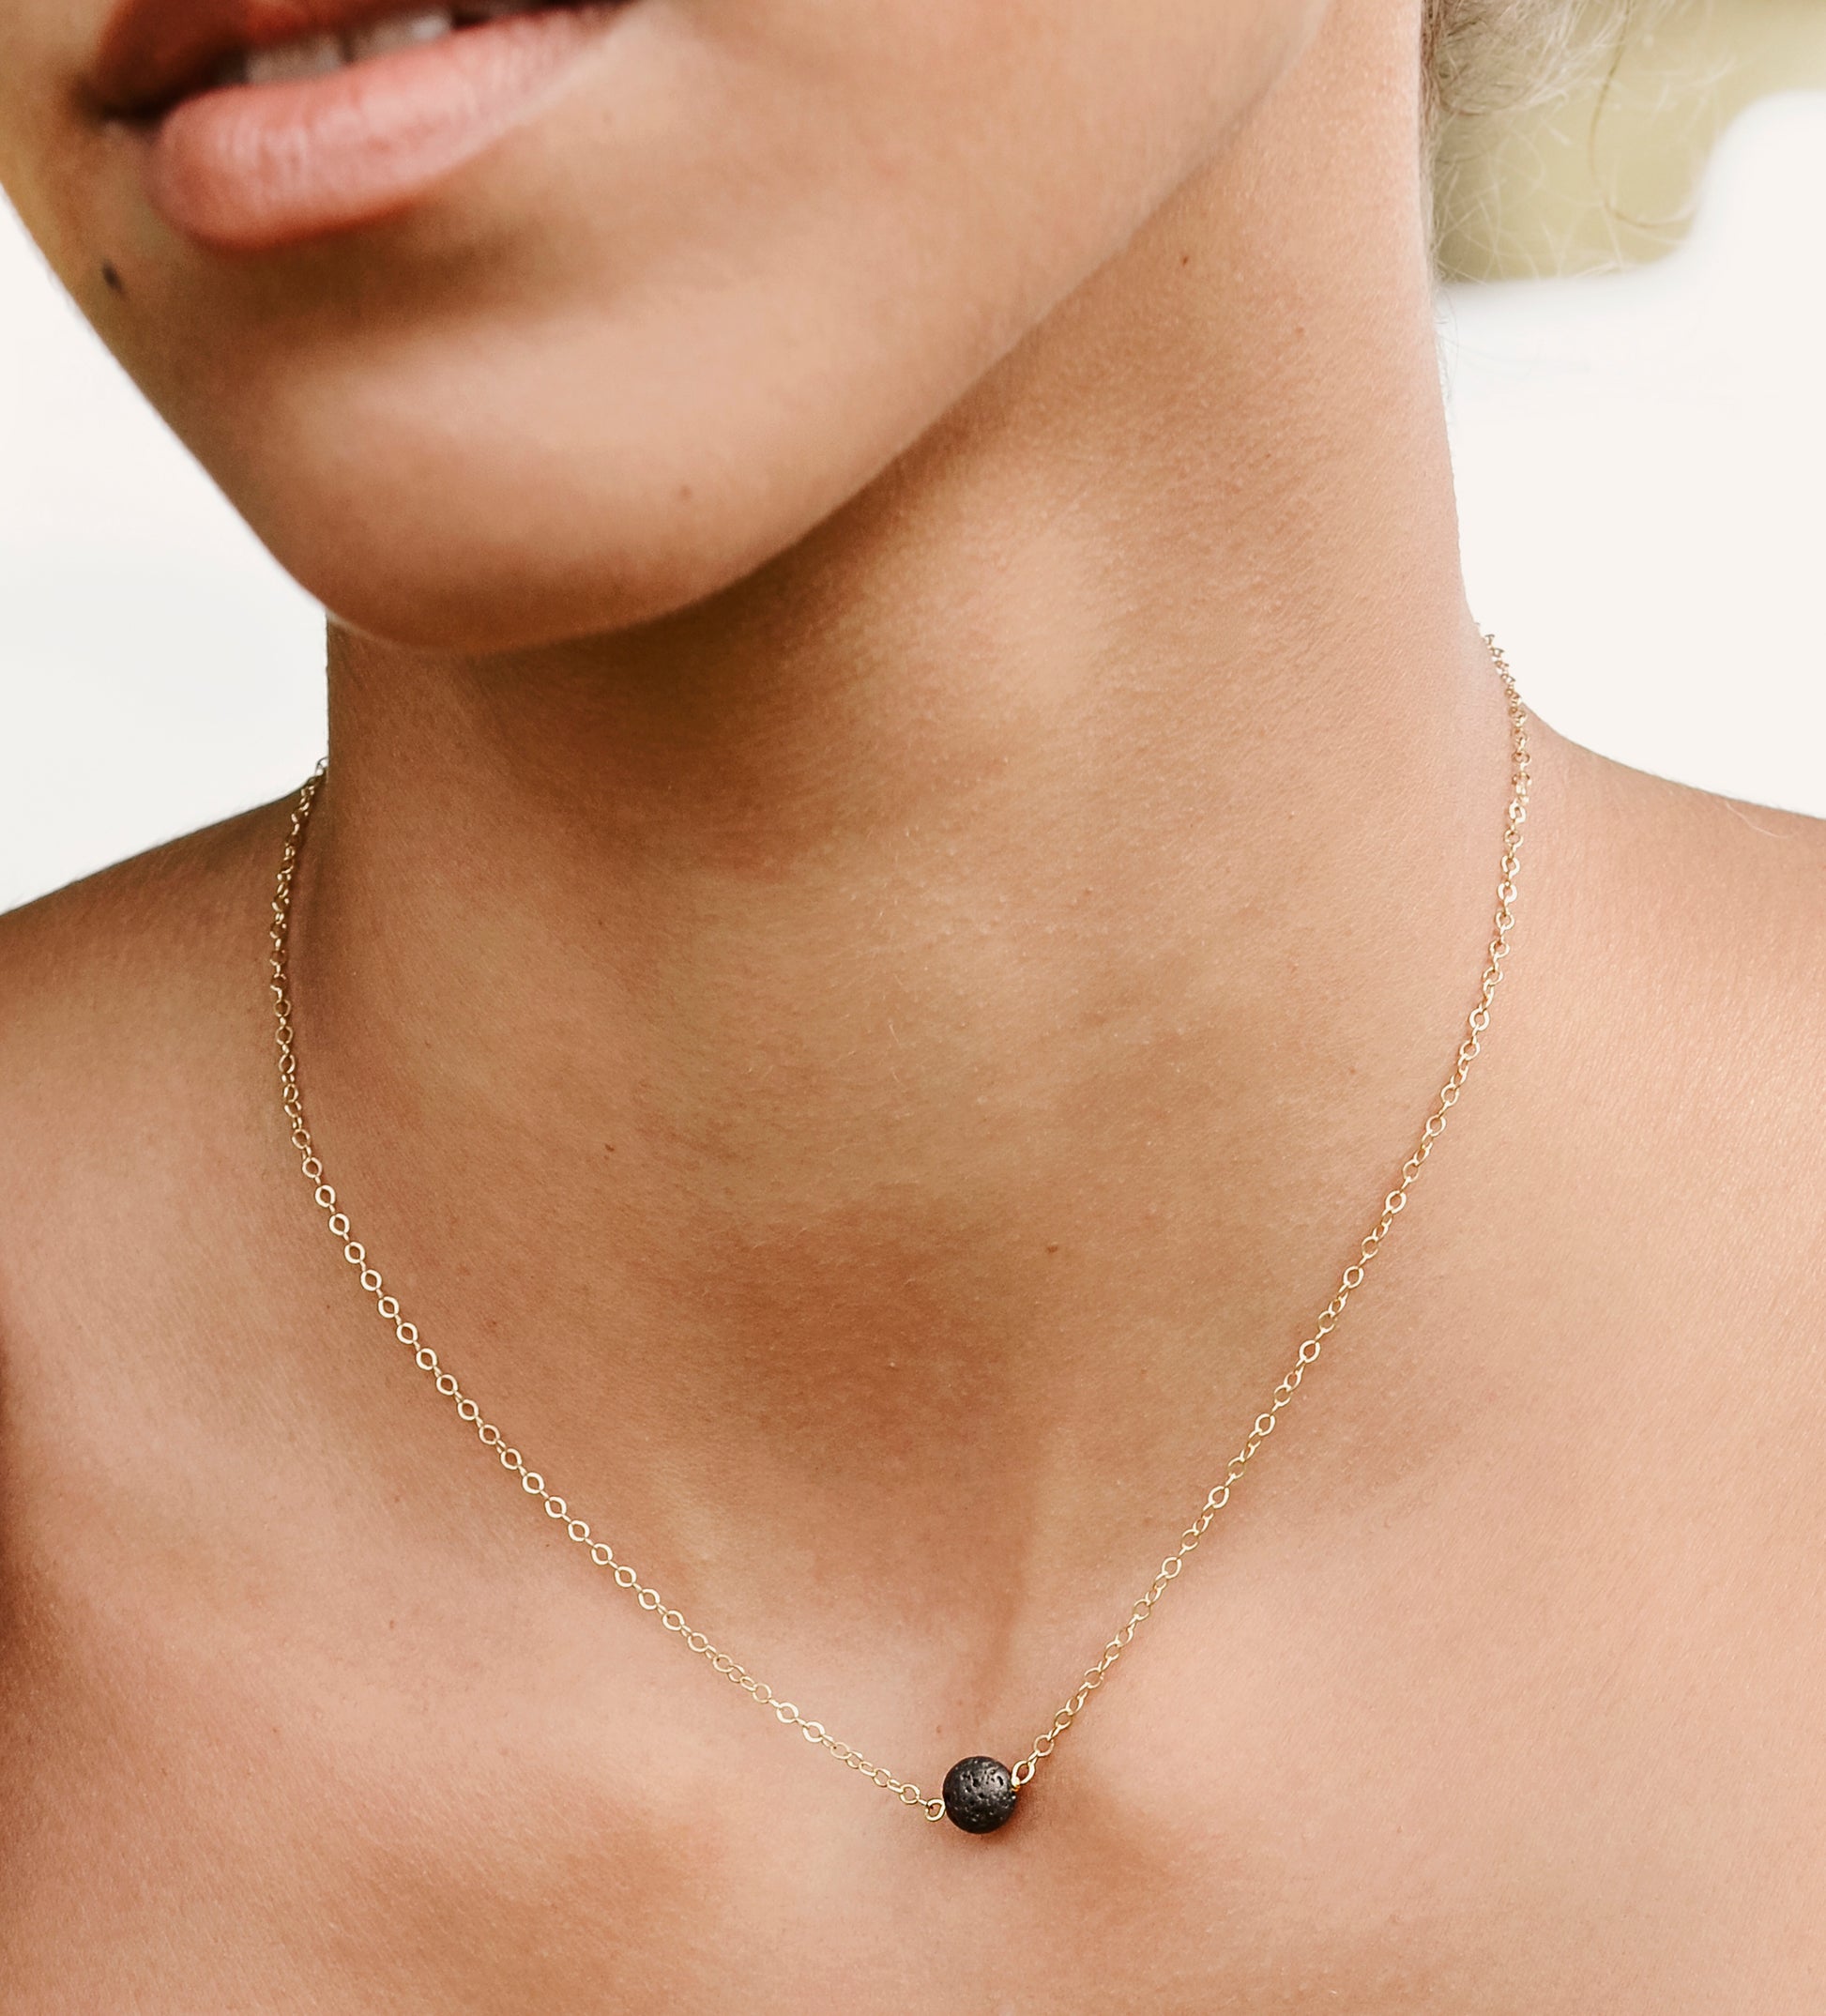 Handmade genuine black lava round stone placed onto a 14k gold filled chain. Modeled image.